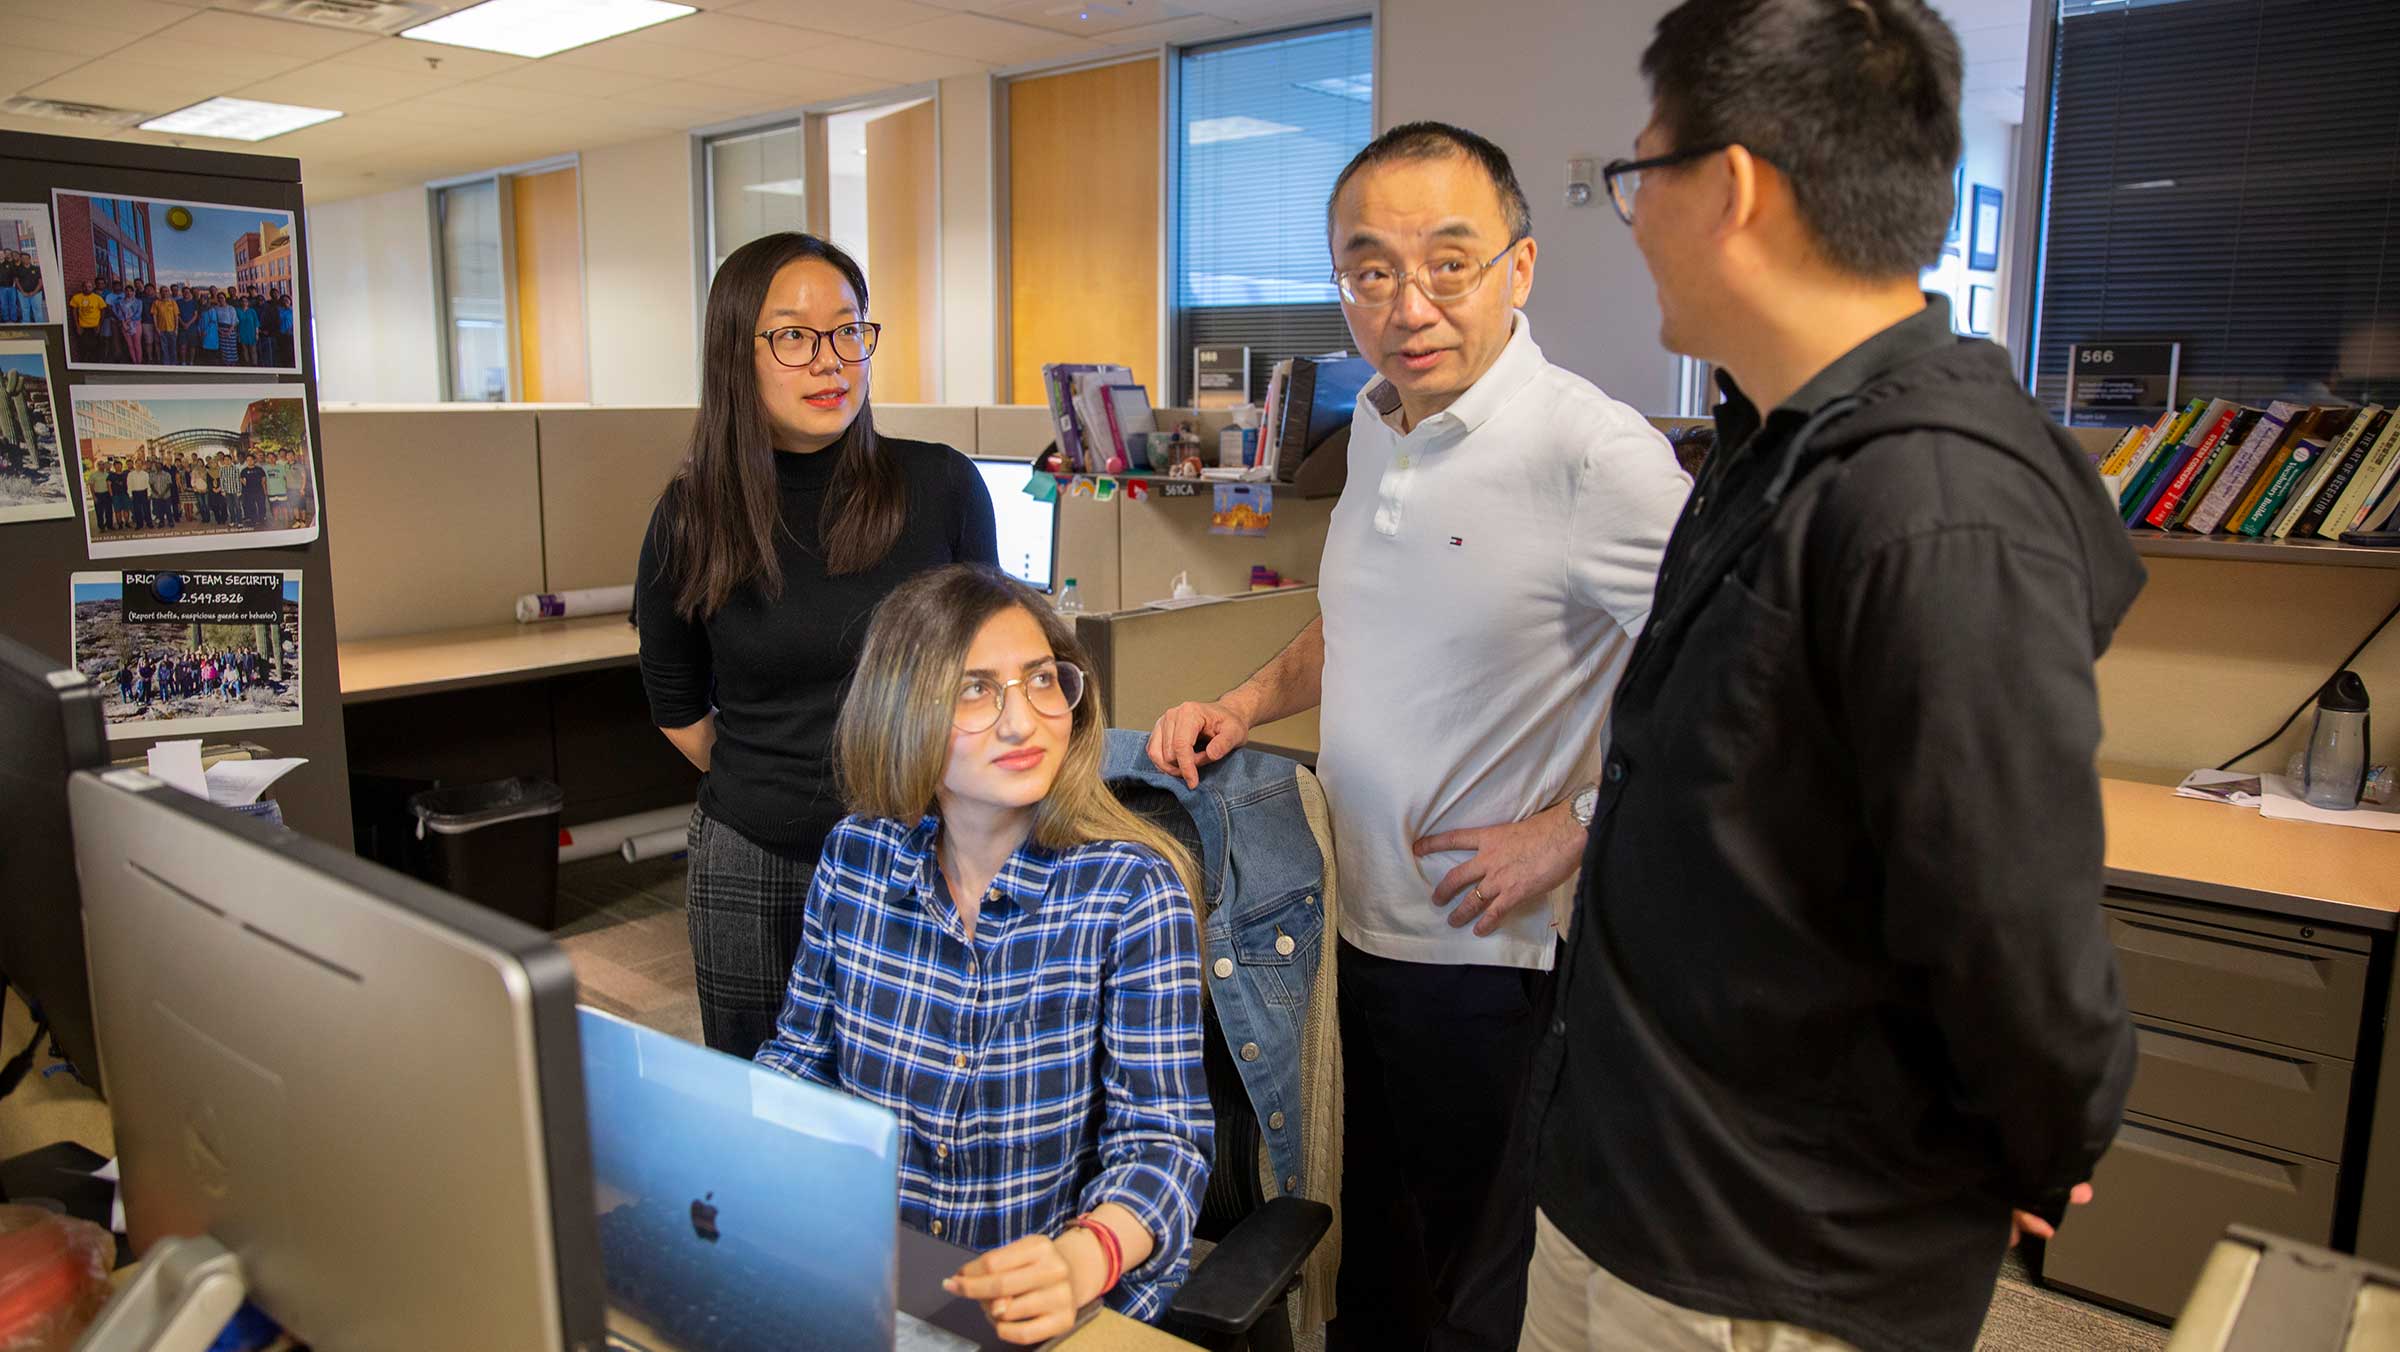 A faculty memeber stands at a desk with three students, discussing data on the computer screen